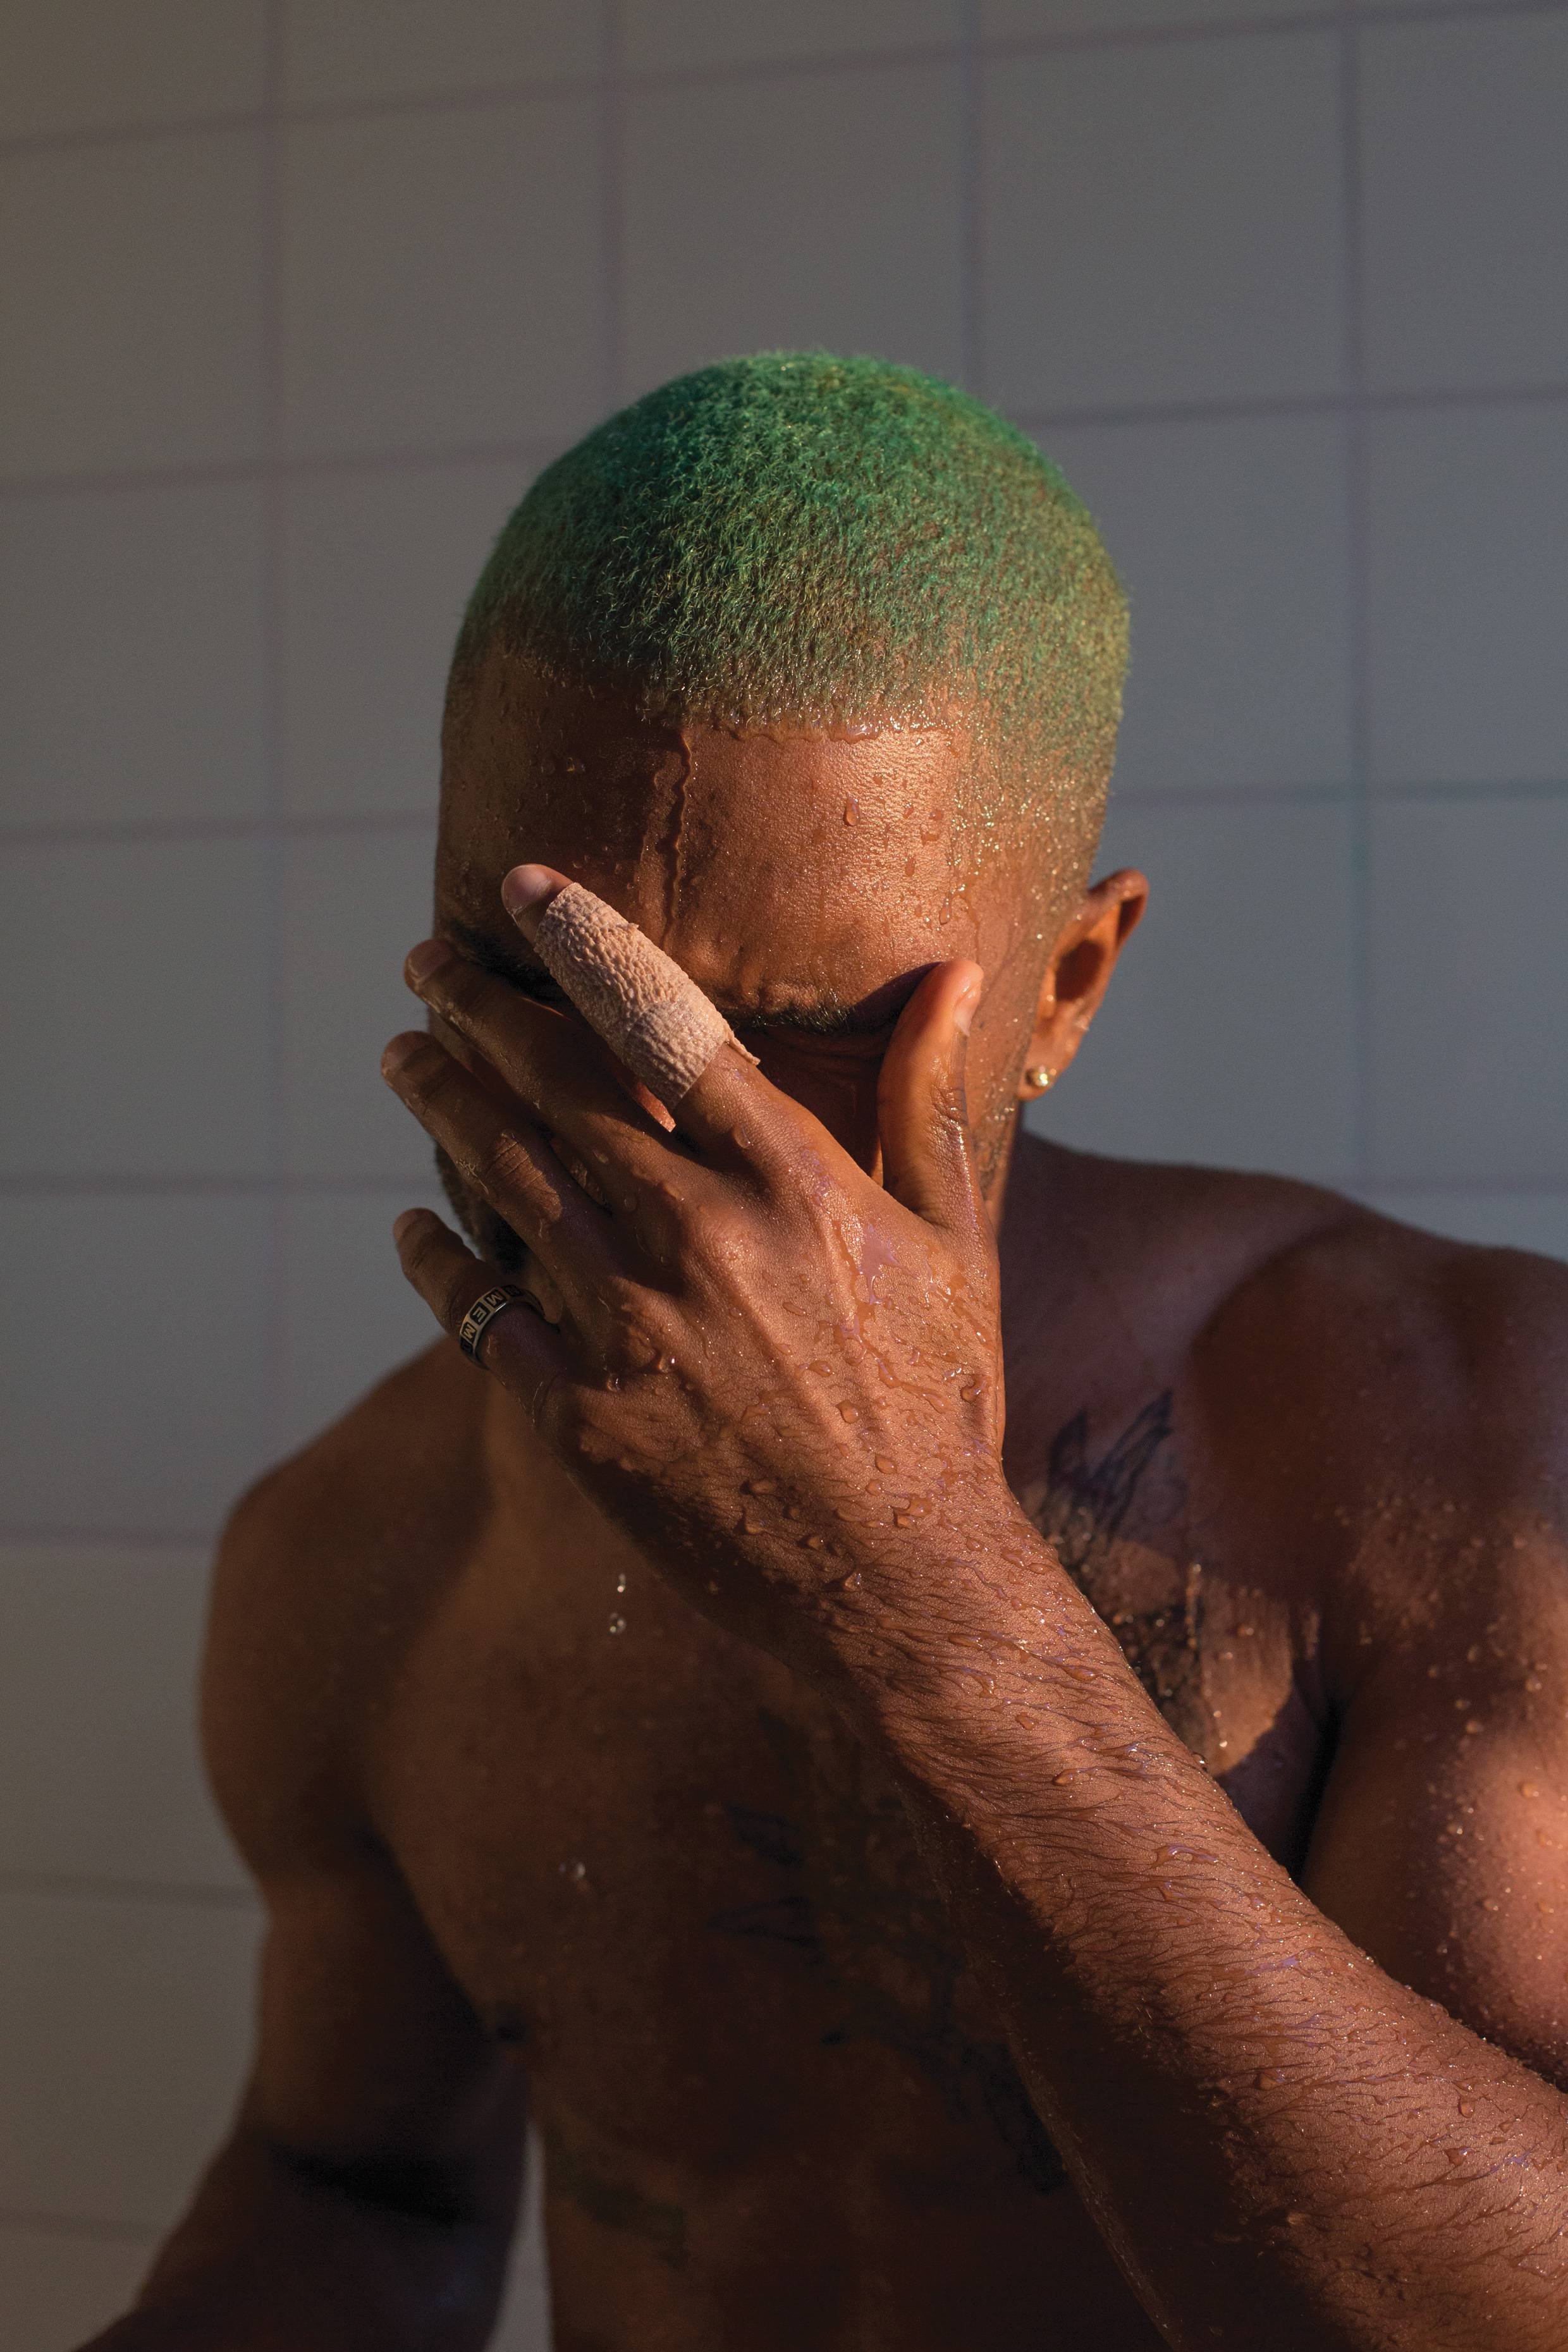 Blonde frank. Frank Ocean. Frank Ocean blonde. Blonde Фрэнк оушен. Blonde Frank Ocean album Cover.